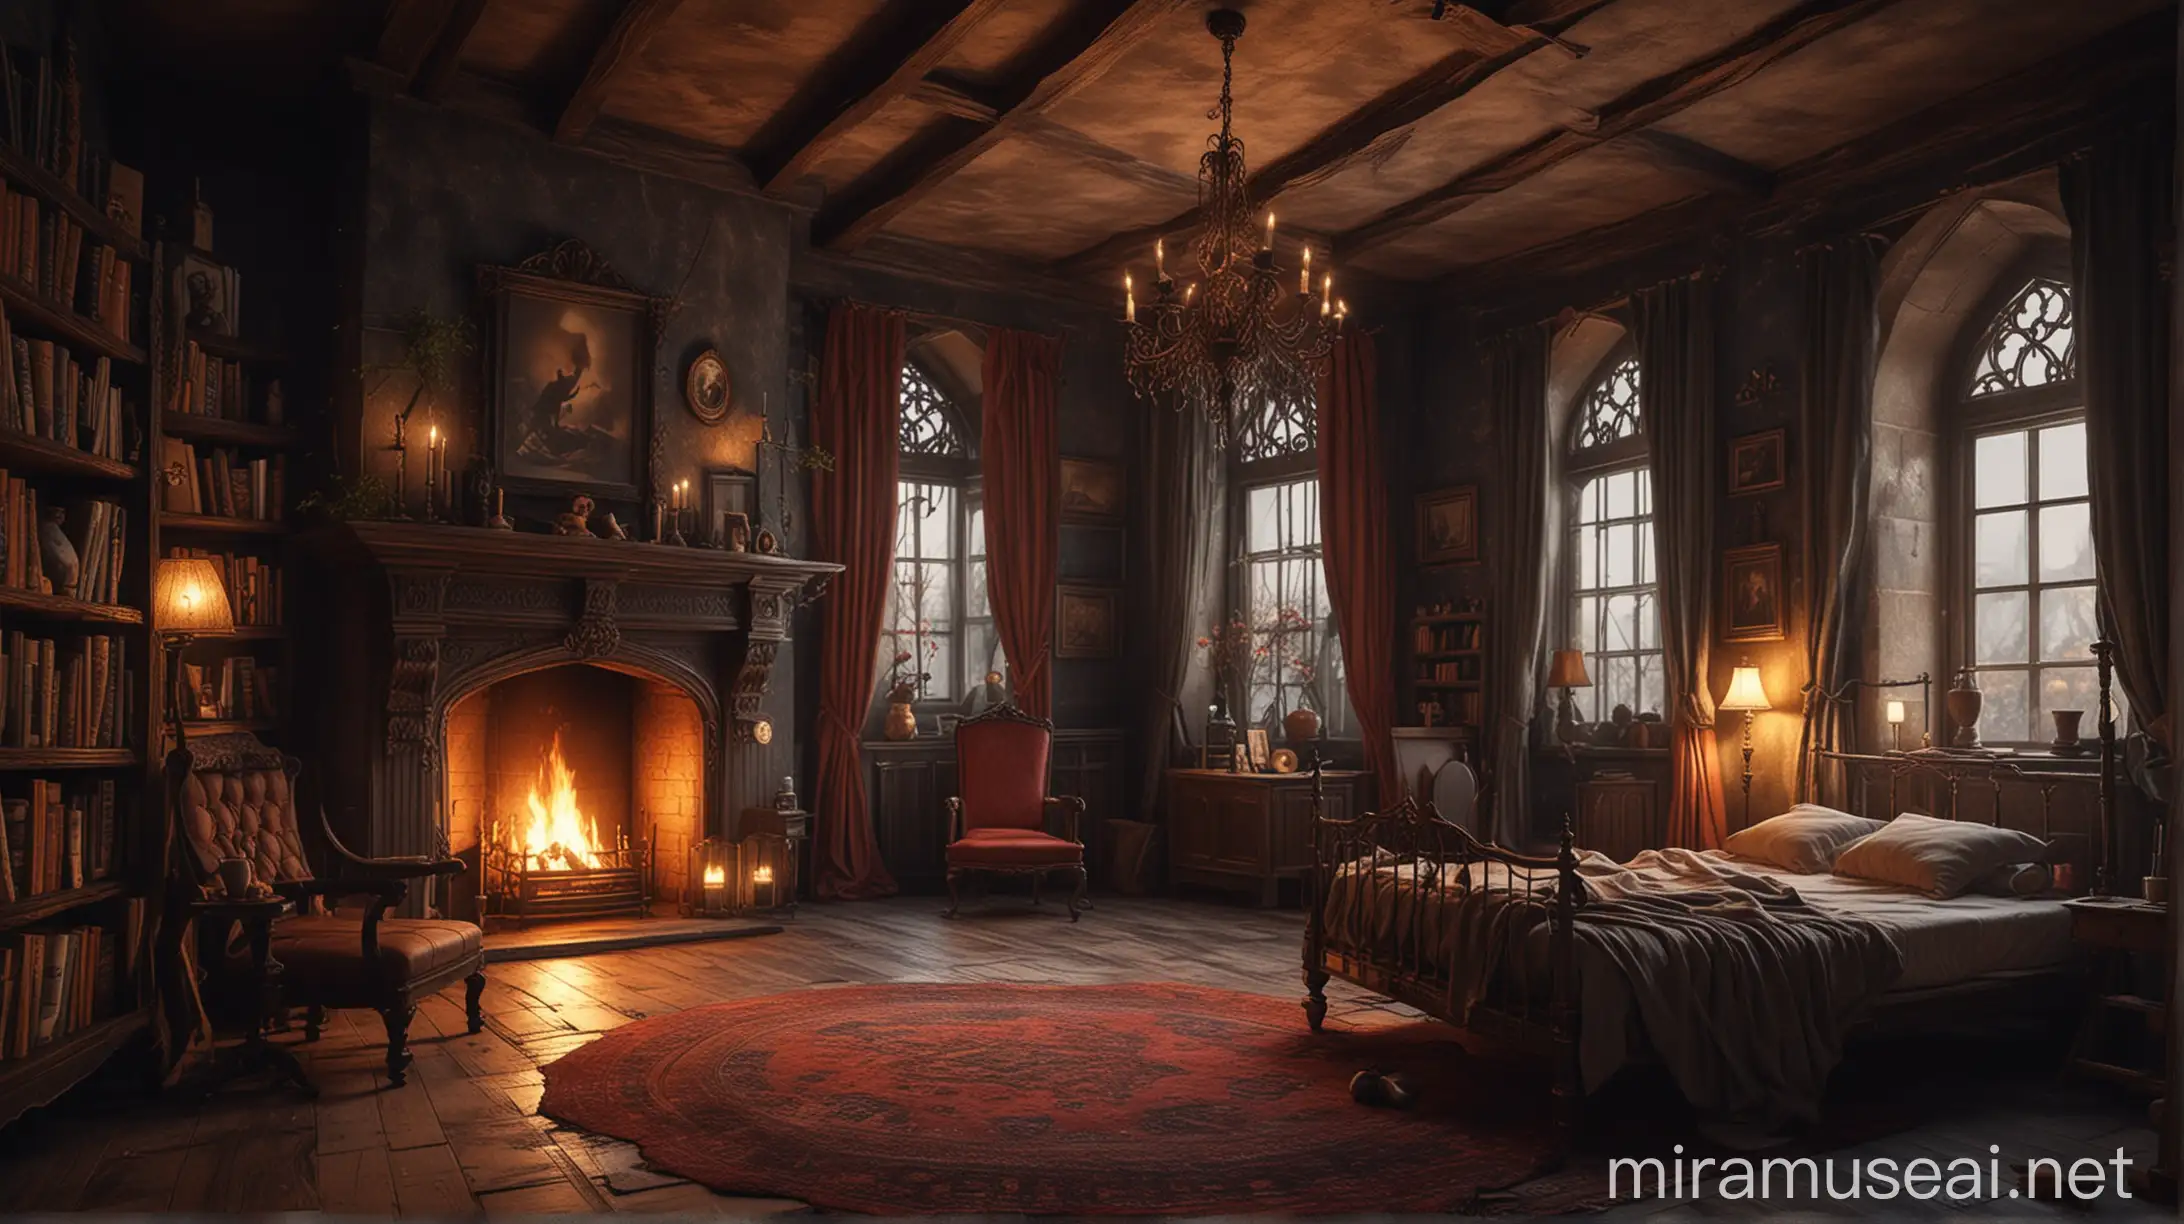 arafed room with a fireplace and a bed in it, cozy place, cosy atmoshpere, cozy environment, gothic epic library, gothic mansion room, cozy room, cozy and peaceful atmosphere, gothic epic library concept, cozy setting, cosy enchanted scene, magical environment, gothic library, cozy atmospheric, warm interior, castle library, cozy wallpaper, relaxing concept art